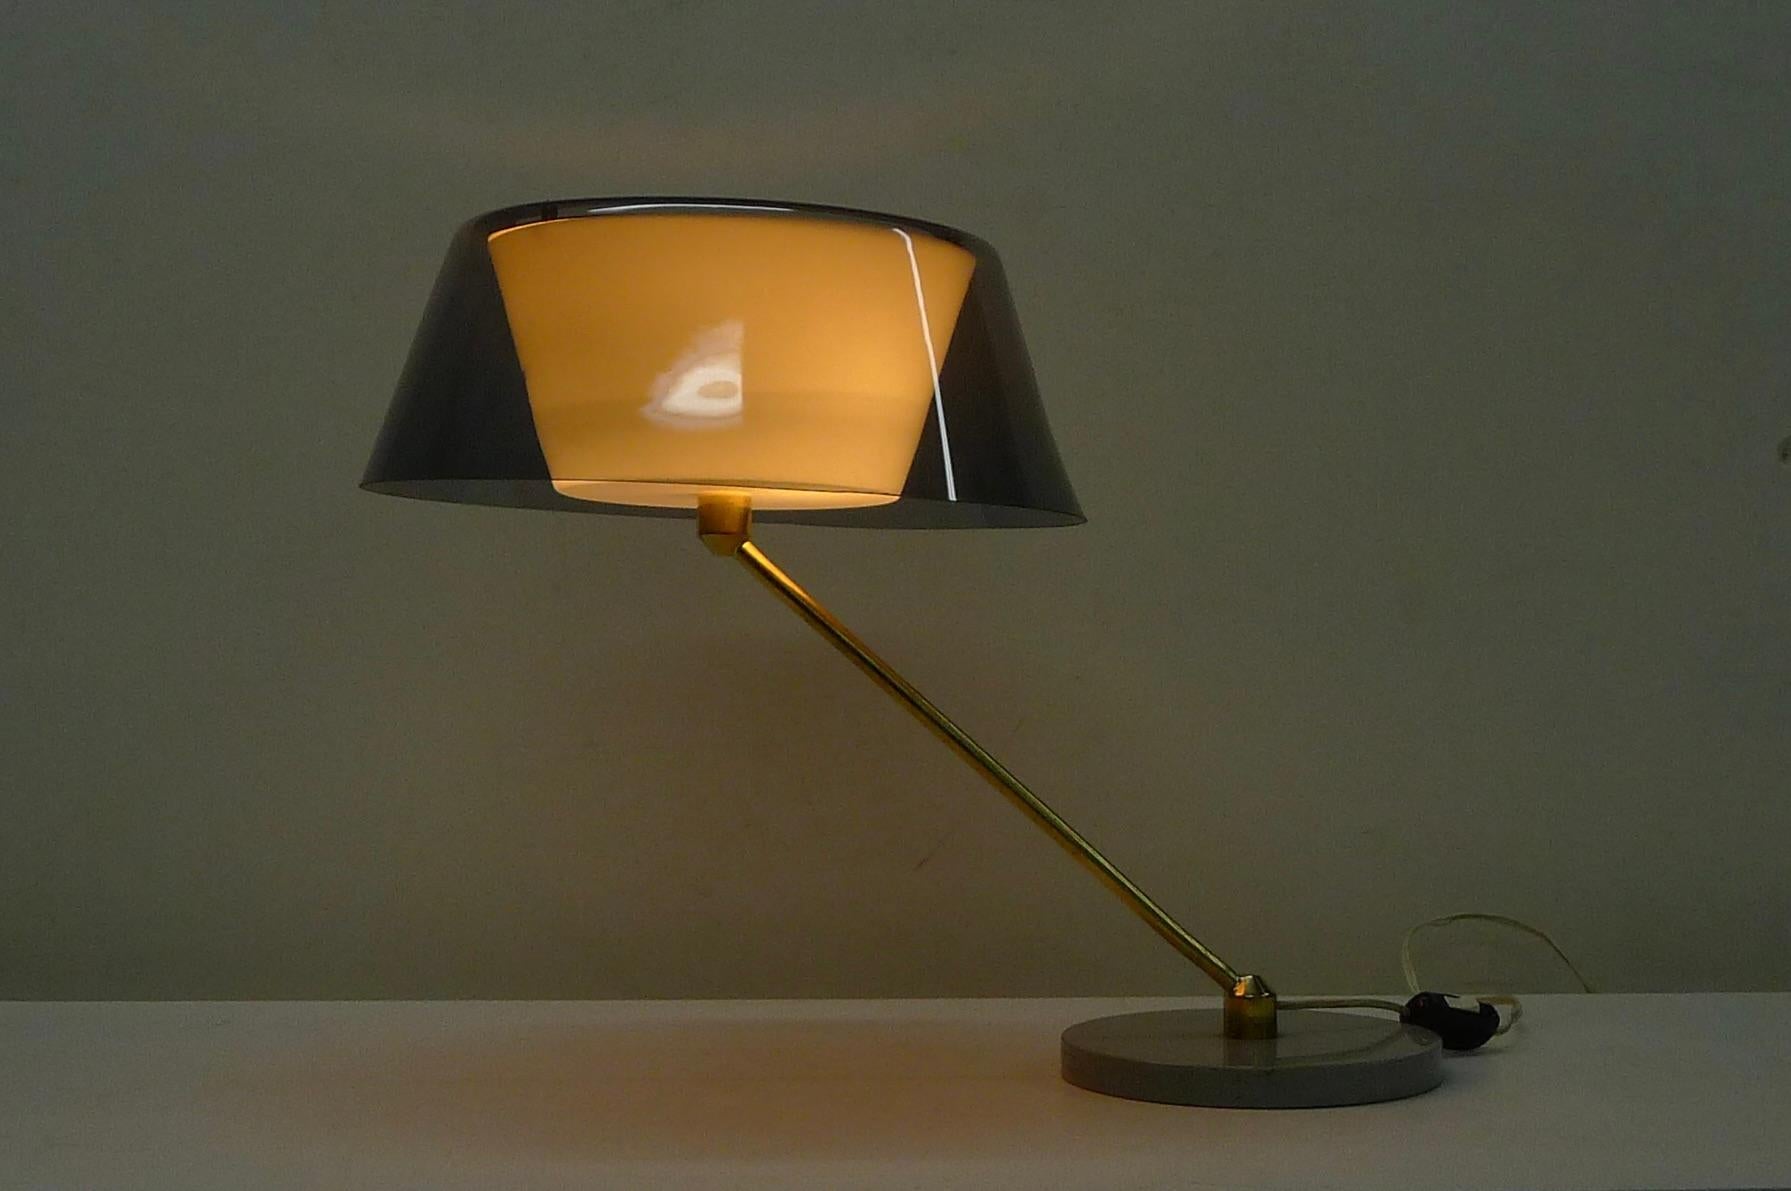 Tito Agnoli, Modello 253 desk or table lamp, designed 1958 and produced around 1960 by O'Luce, Italy.  With inverted perspex shades, the outer in soft violet and inner in white. 
Brass stem rotates from the grey enamelled cast iron